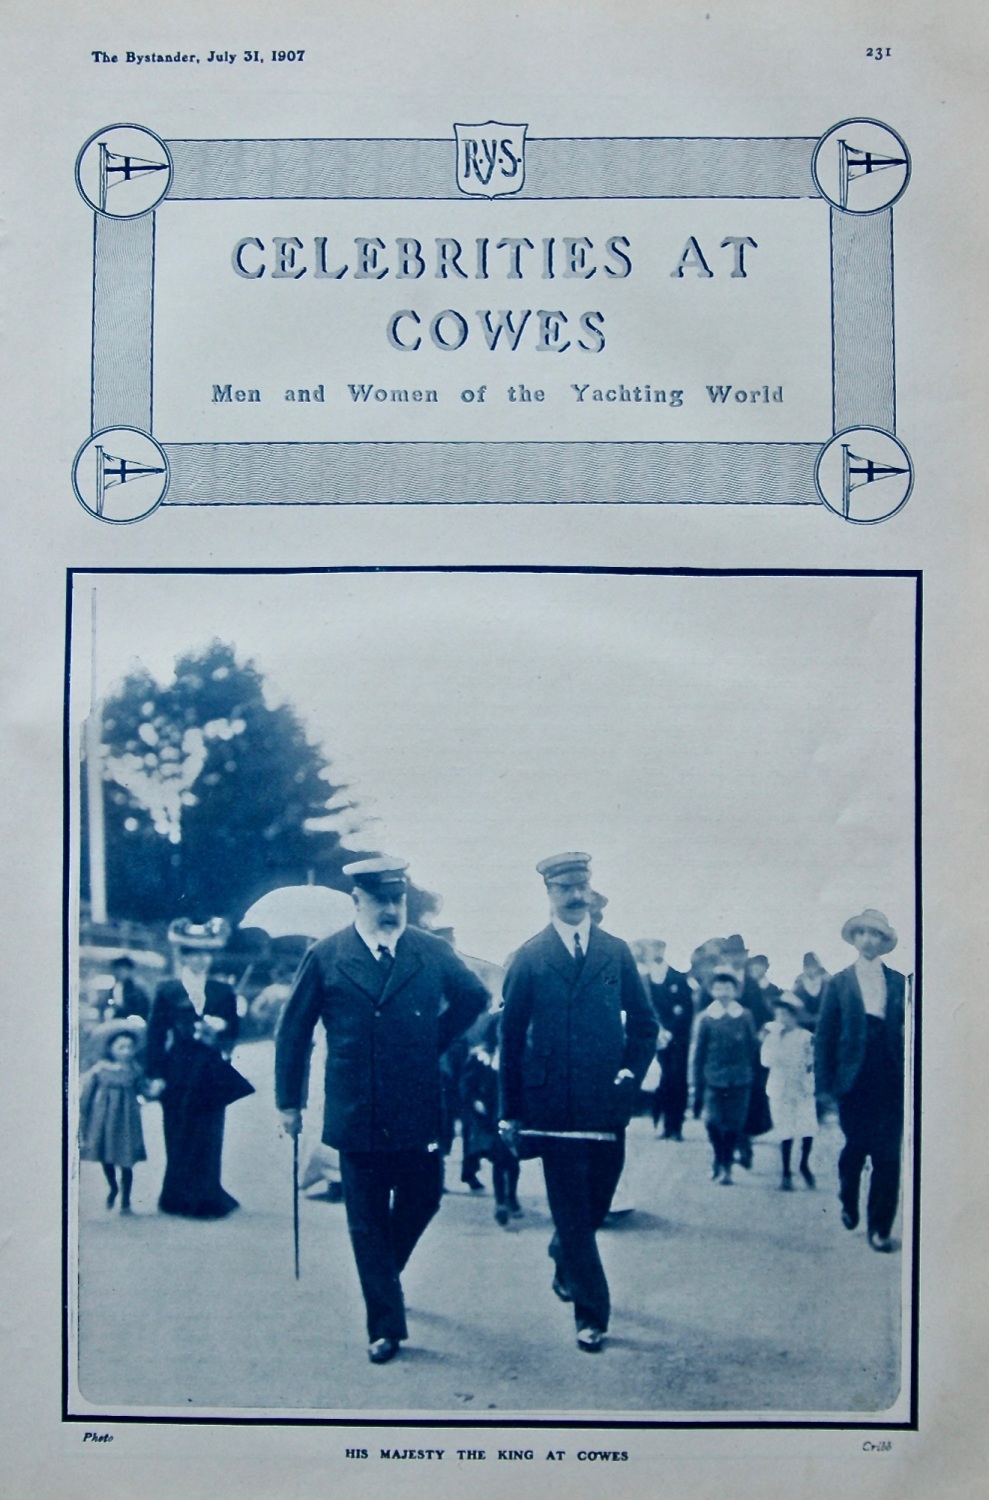 Celebrities at Cowes. (Supplement) 1907.